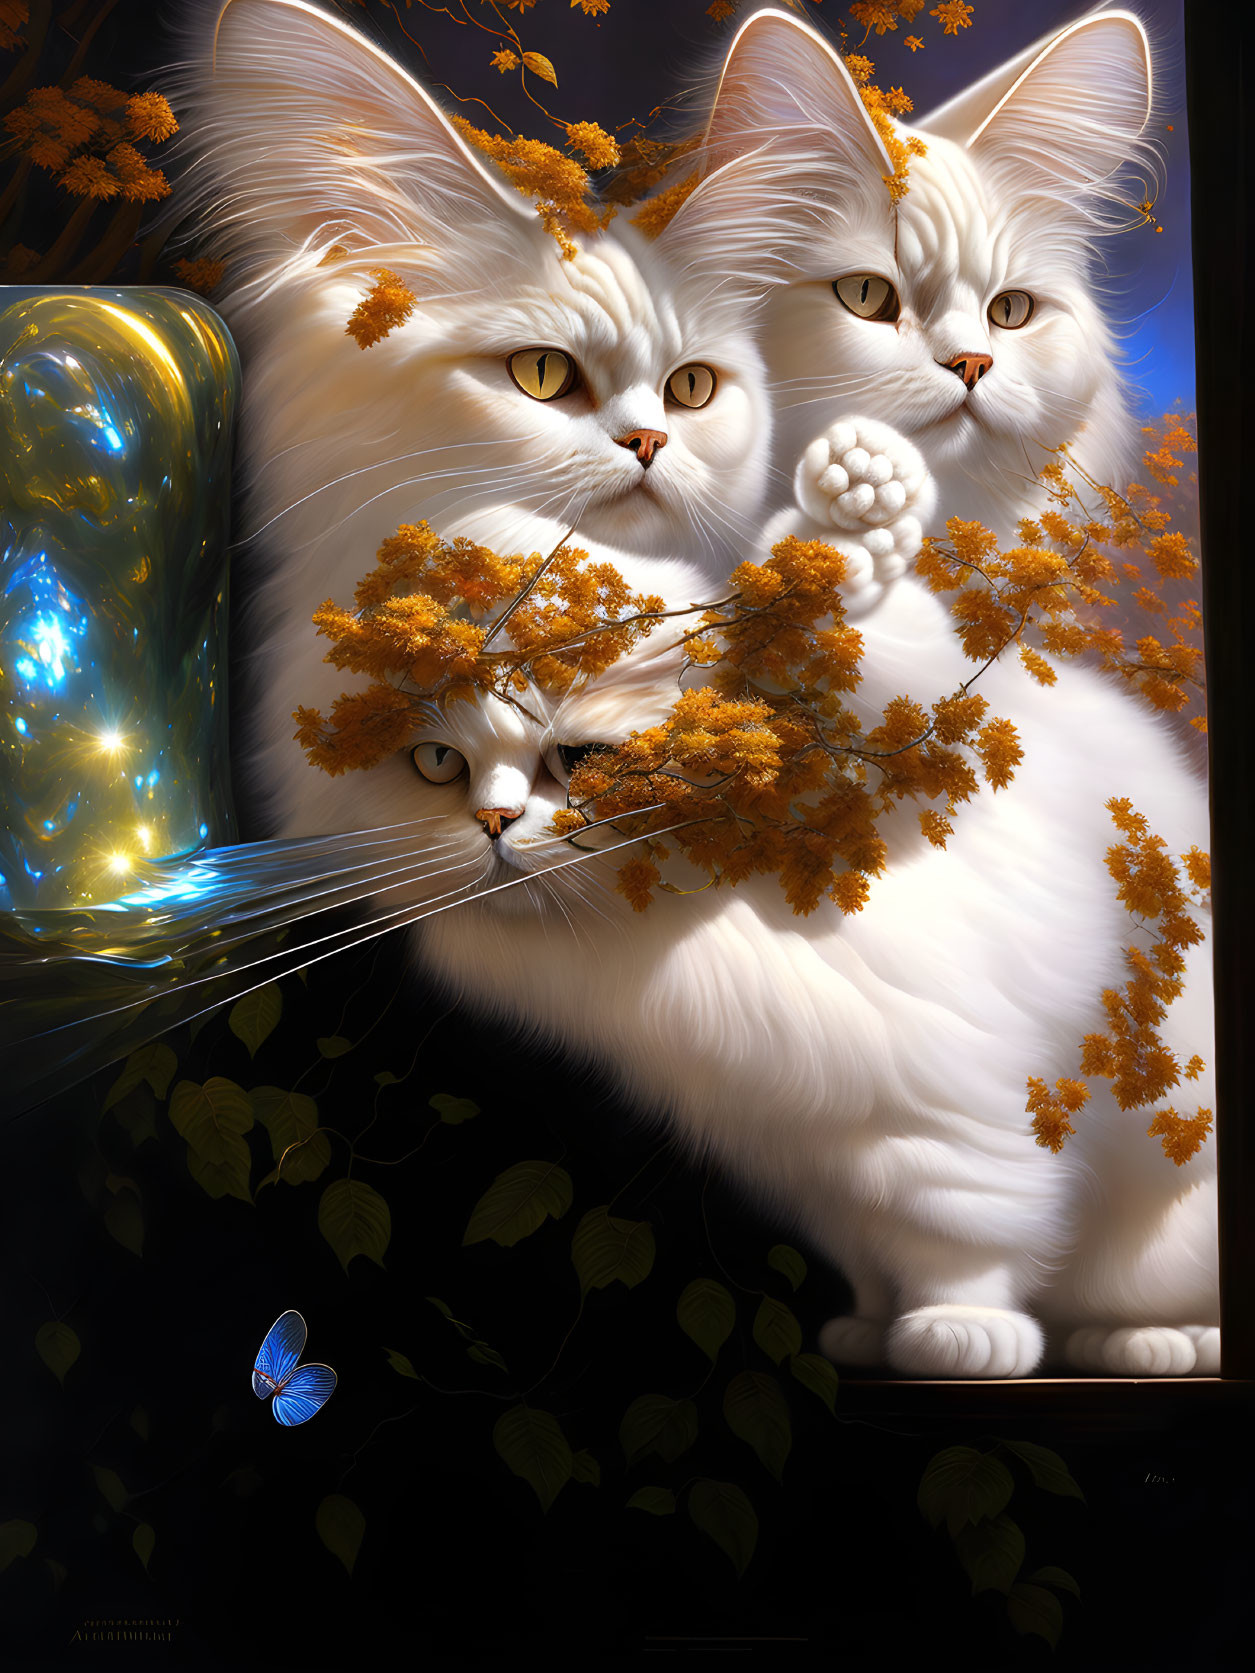 Fluffy white cats with amber eyes, orange flowers, blue butterfly, and sparkling vase